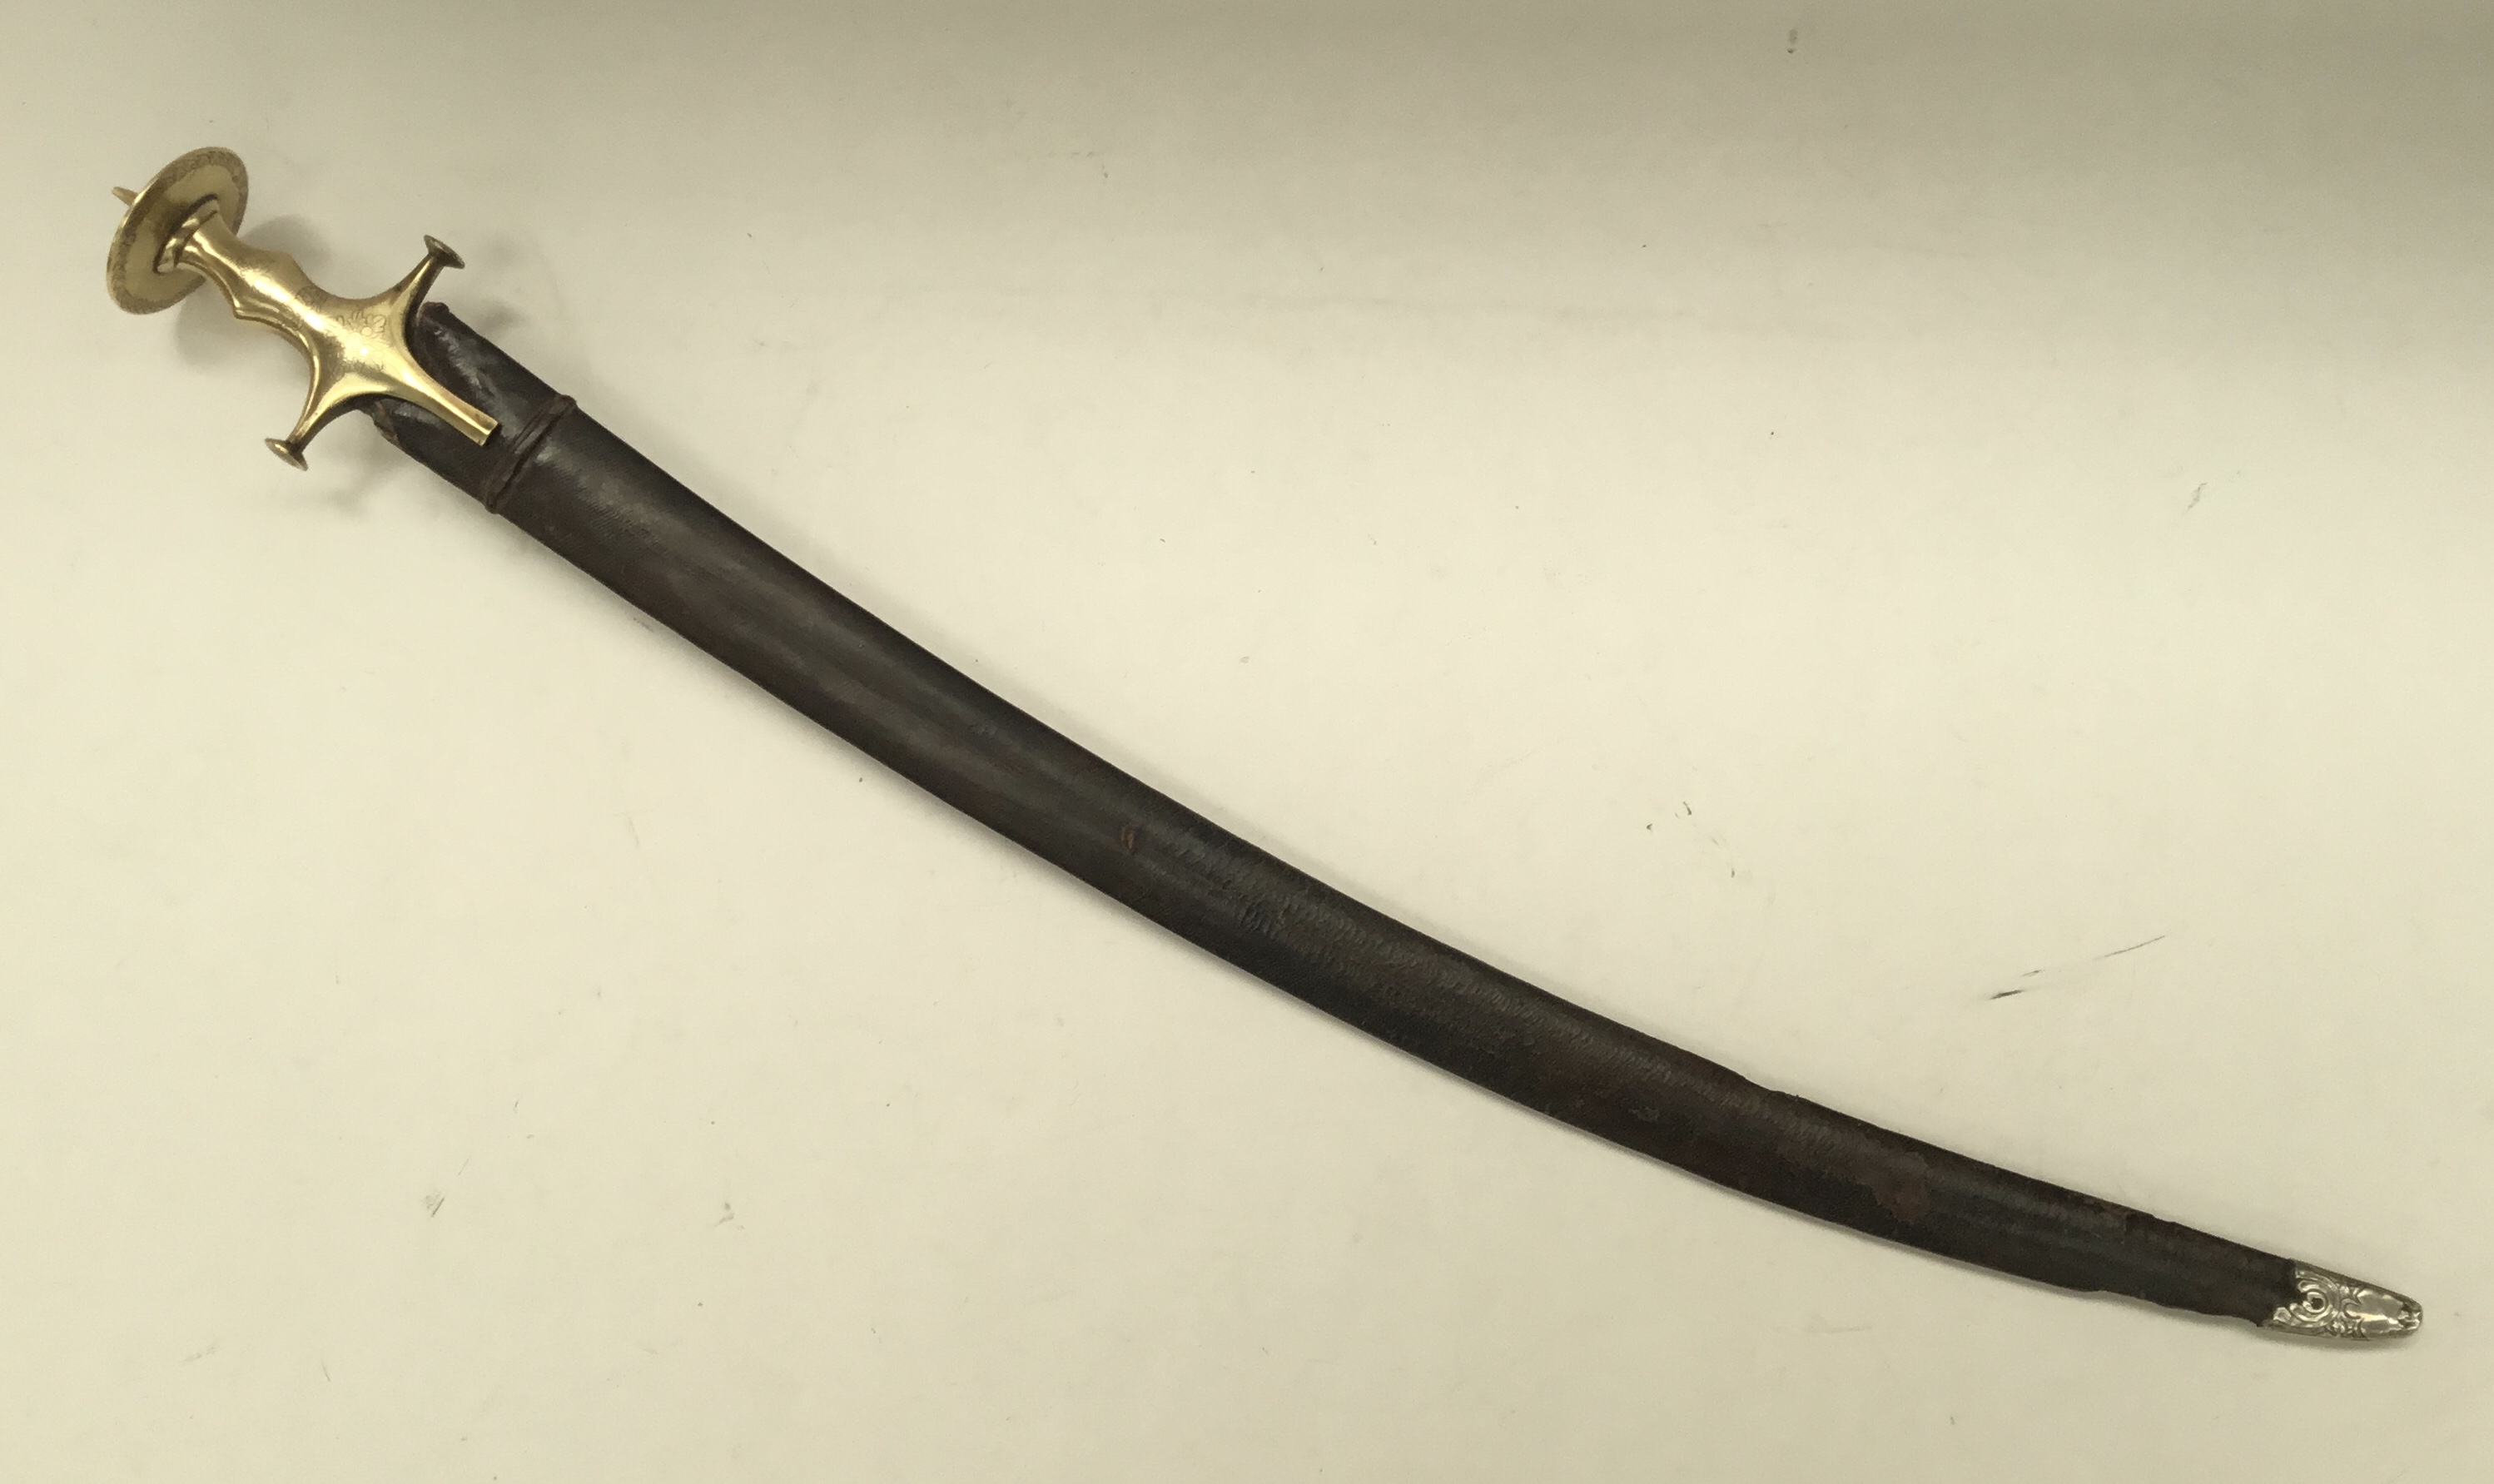 A 19th century Indian talwar sword. Typical form, with brass handle, convex quillons, and disc